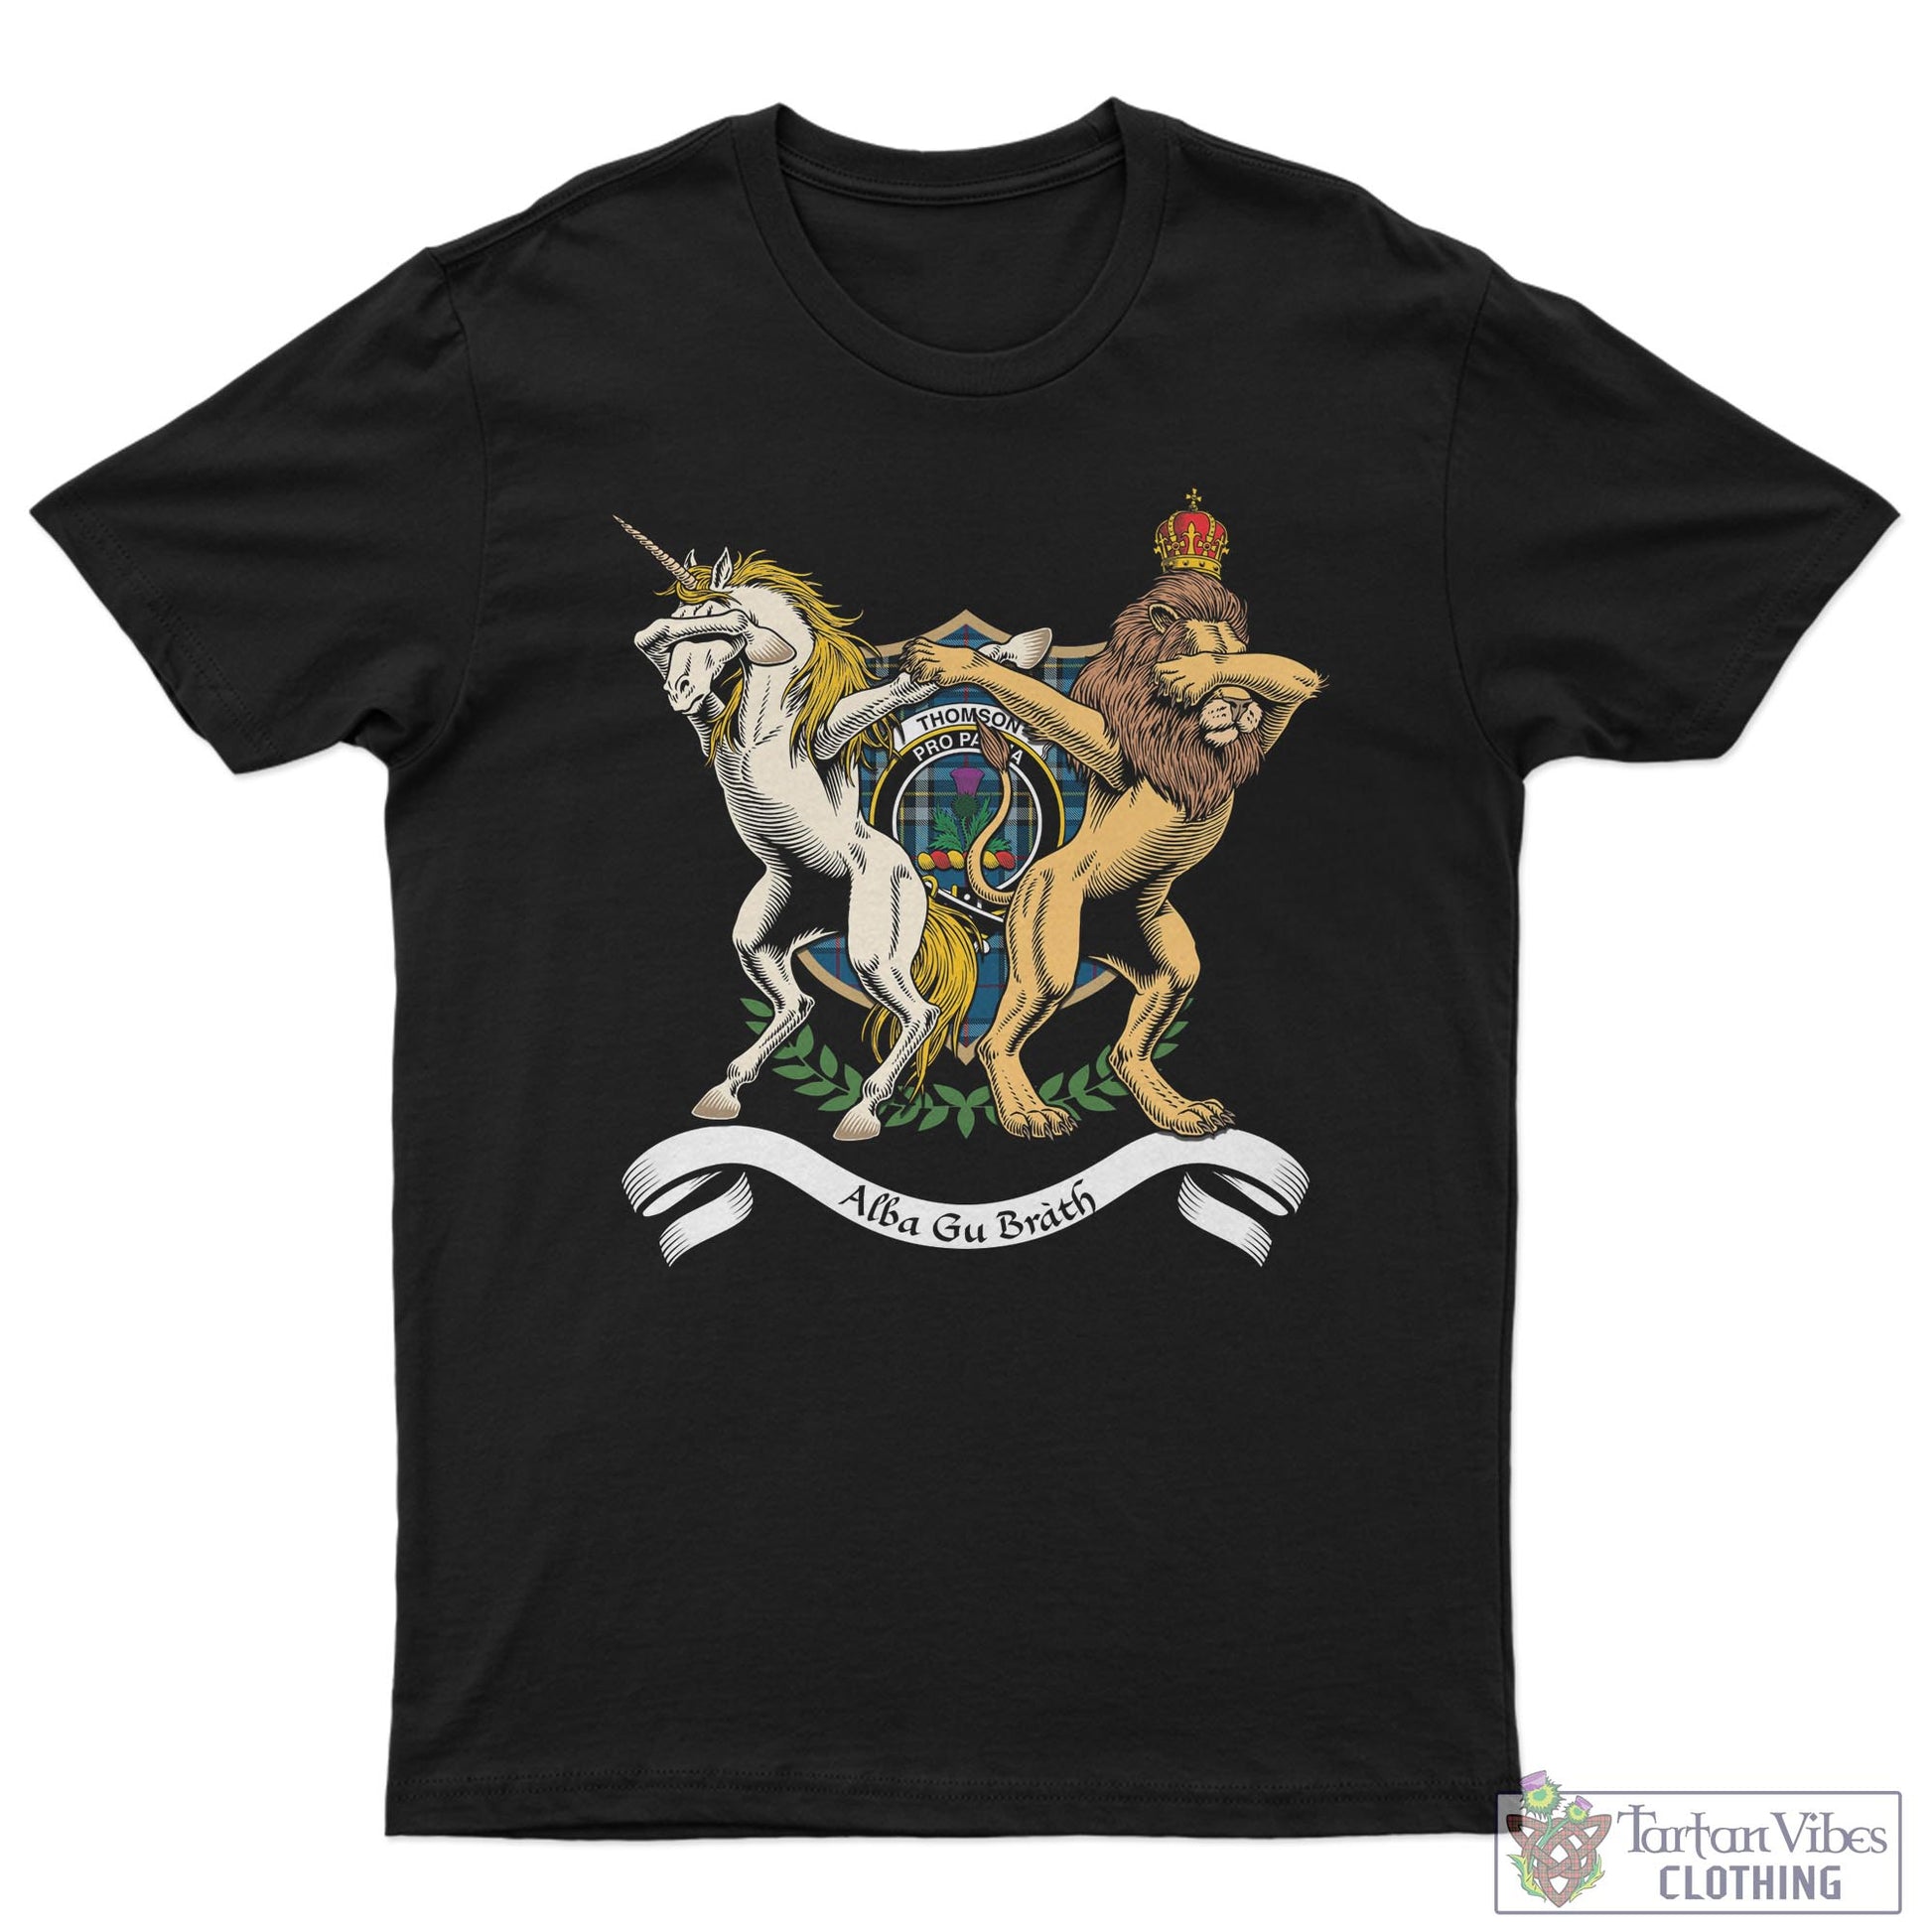 Tartan Vibes Clothing Thomson Dress Blue Family Crest Cotton Men's T-Shirt with Scotland Royal Coat Of Arm Funny Style